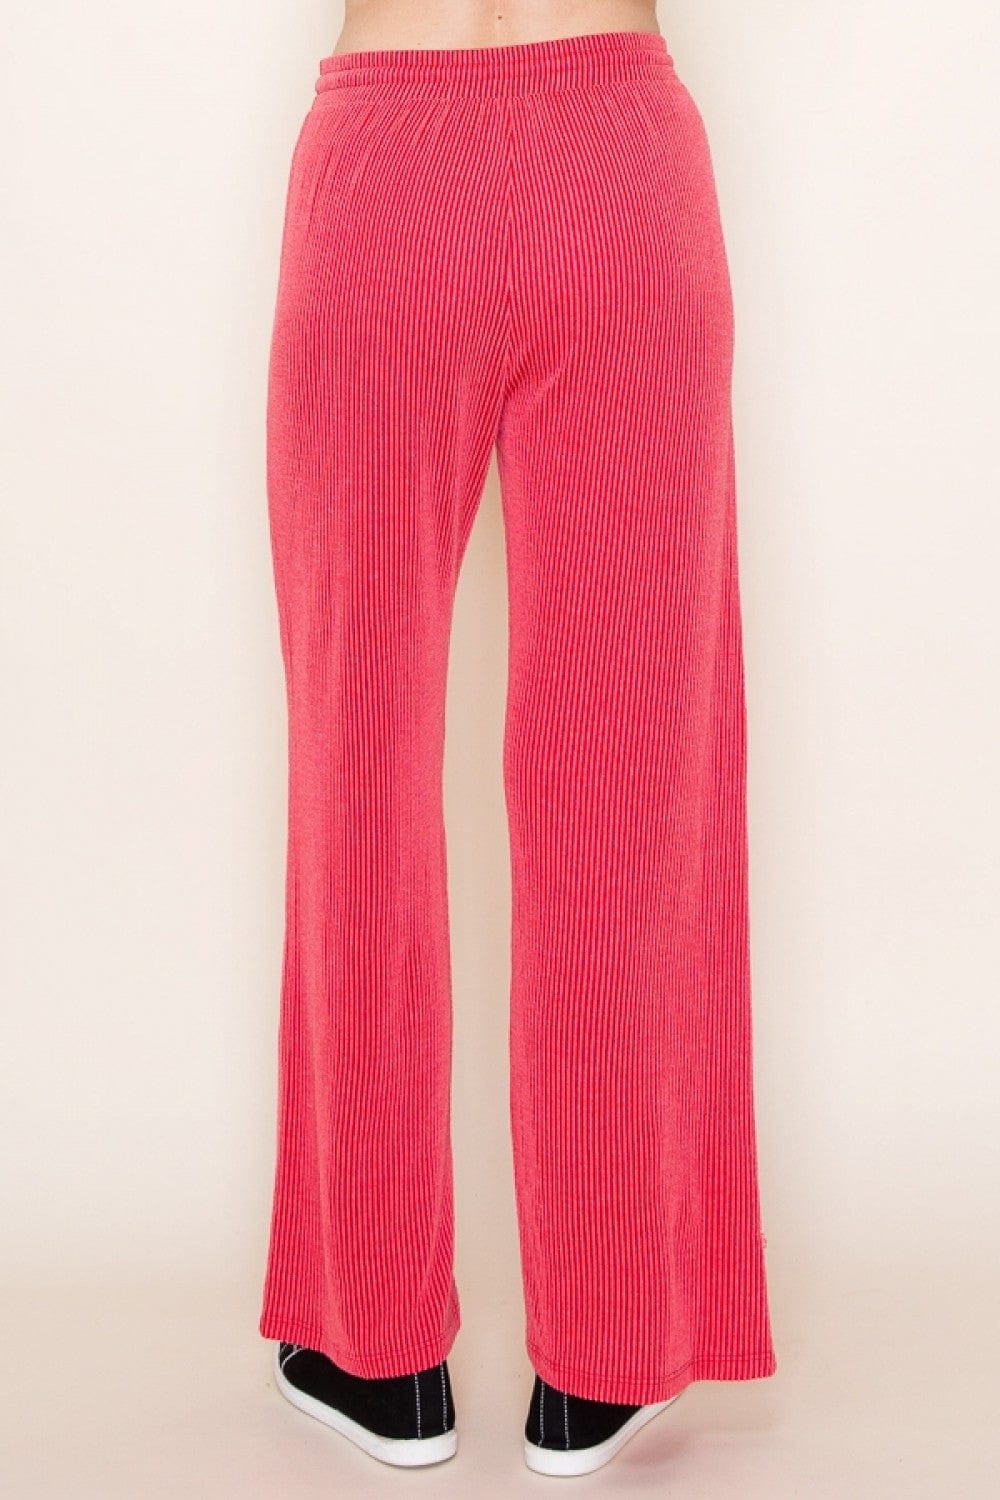 Tres Bien Ribbed Pants with Pockets